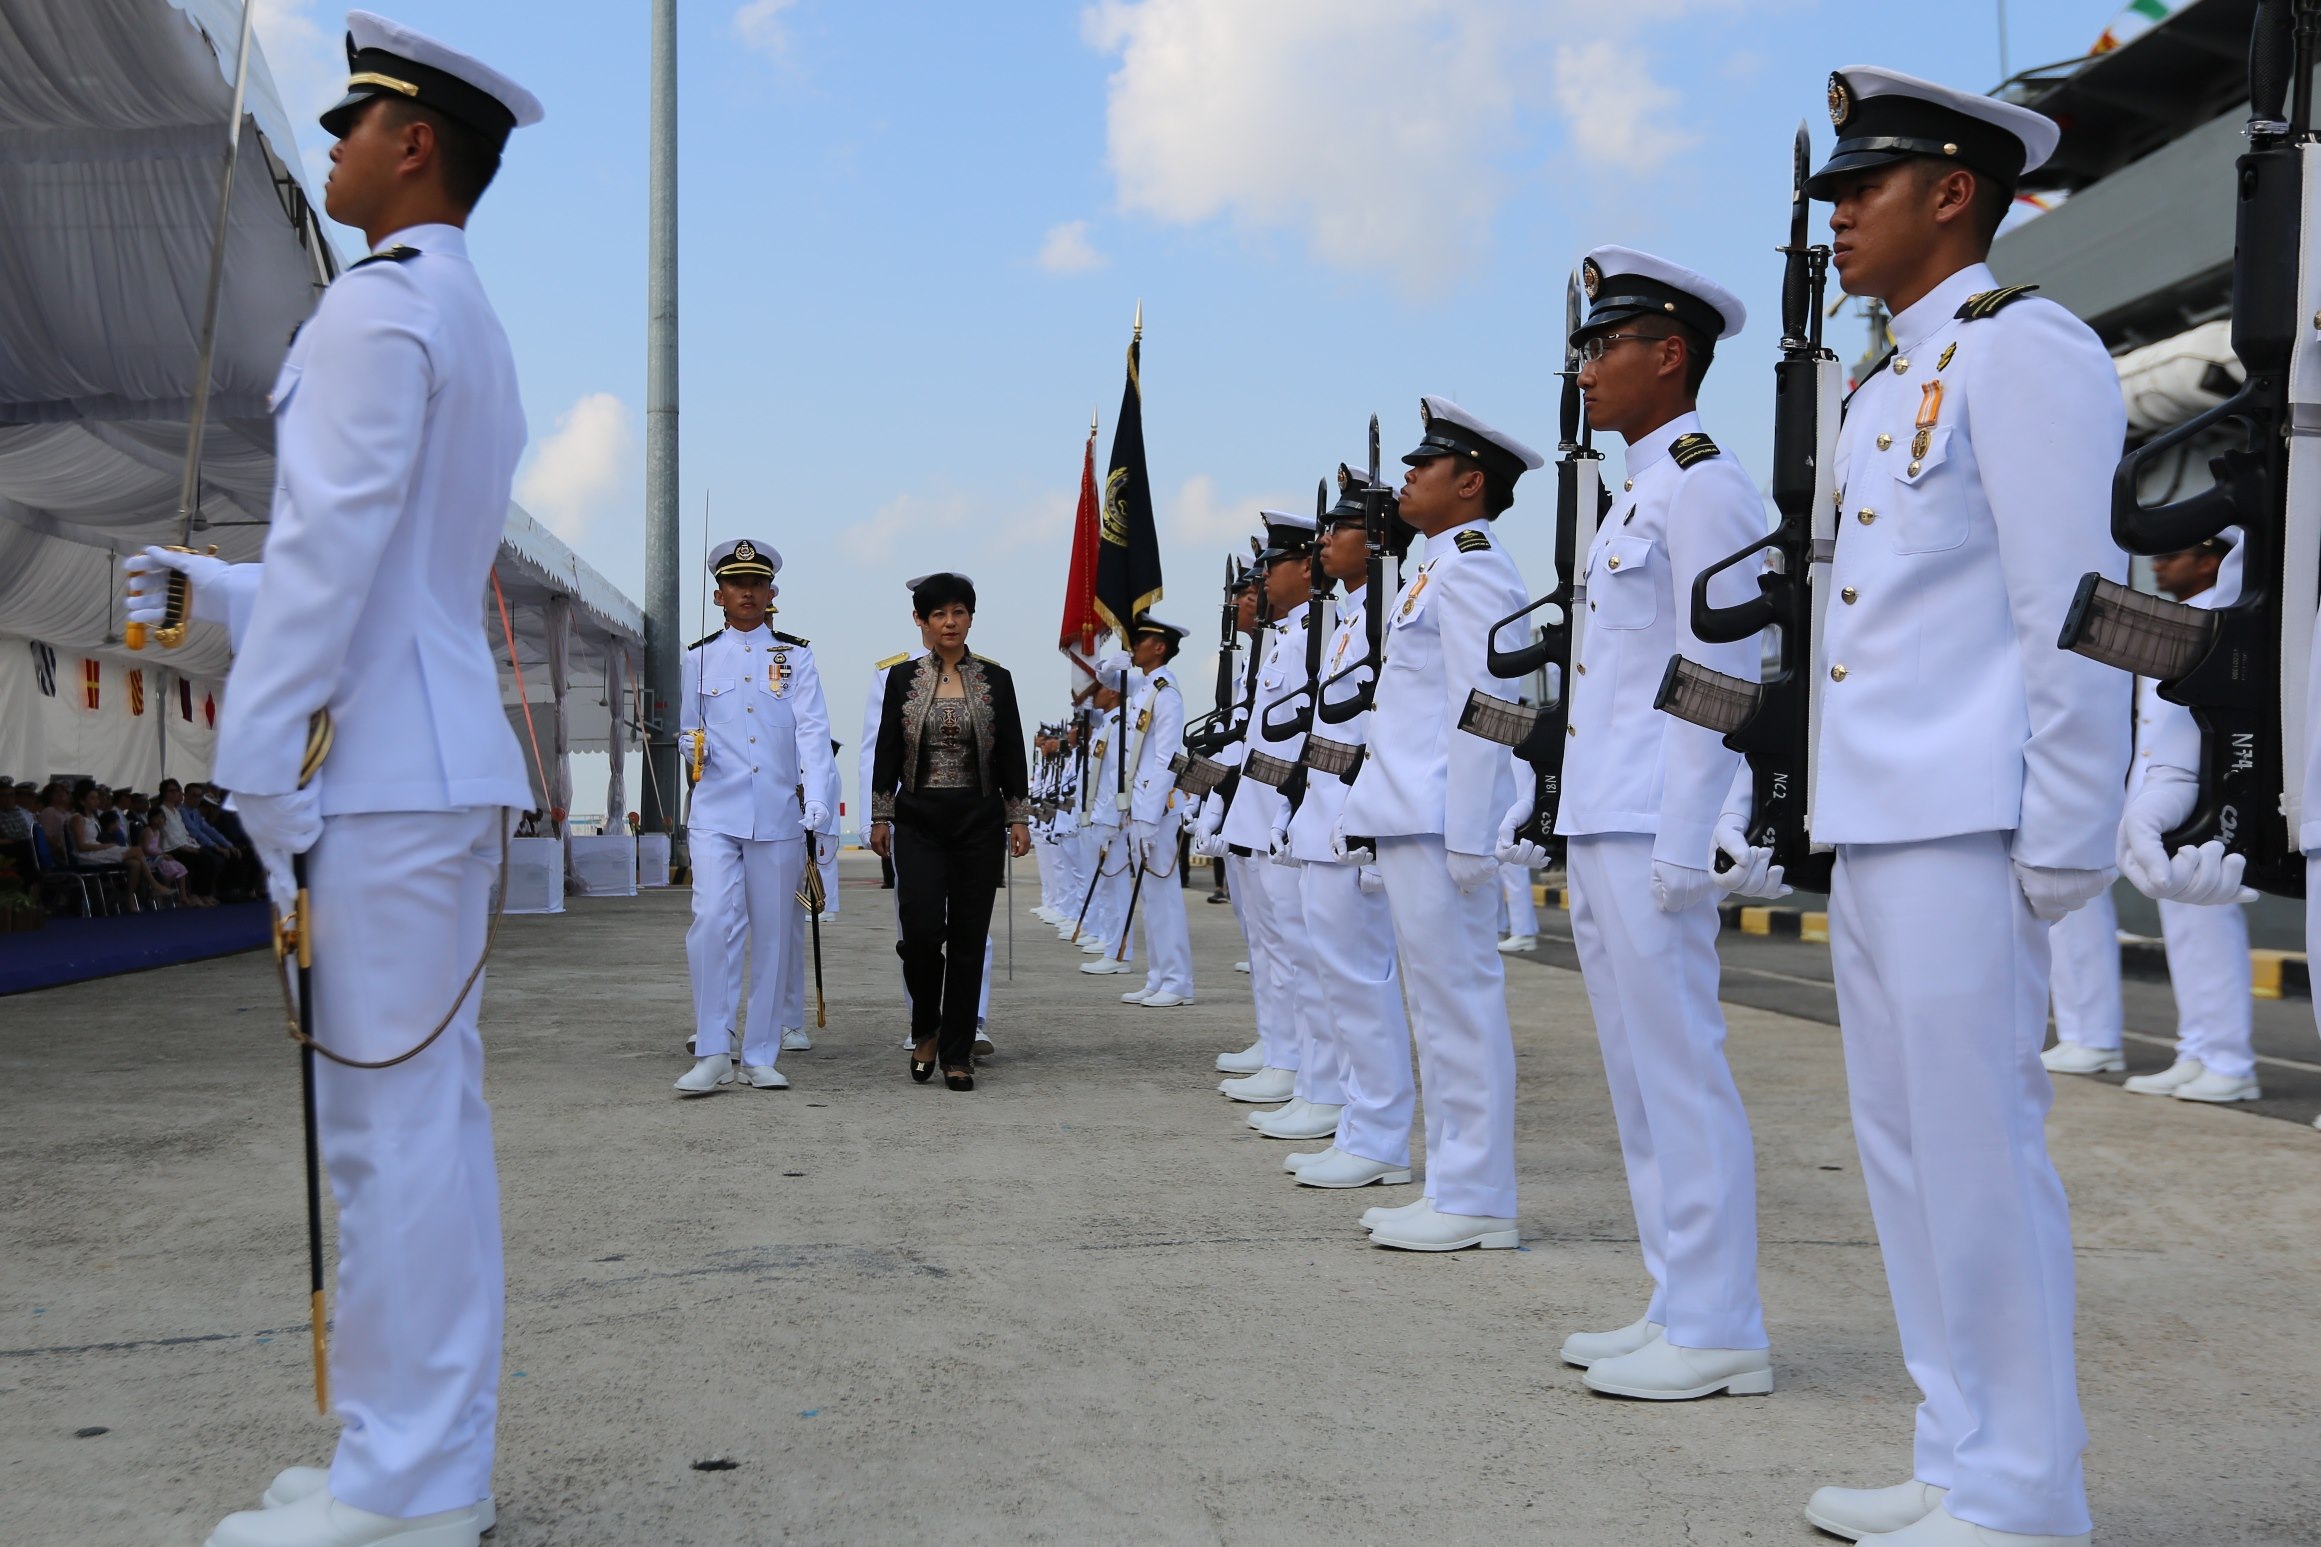 Minister in the Prime Minister's Office, Second Minister for Finance and Education Ms Indranee Rajah reviewing the Guard of Honour at the commissioning of the 4th and 5th Littoral Mission Vessels (LMVs) RSS Justice and RSS Indomitable.